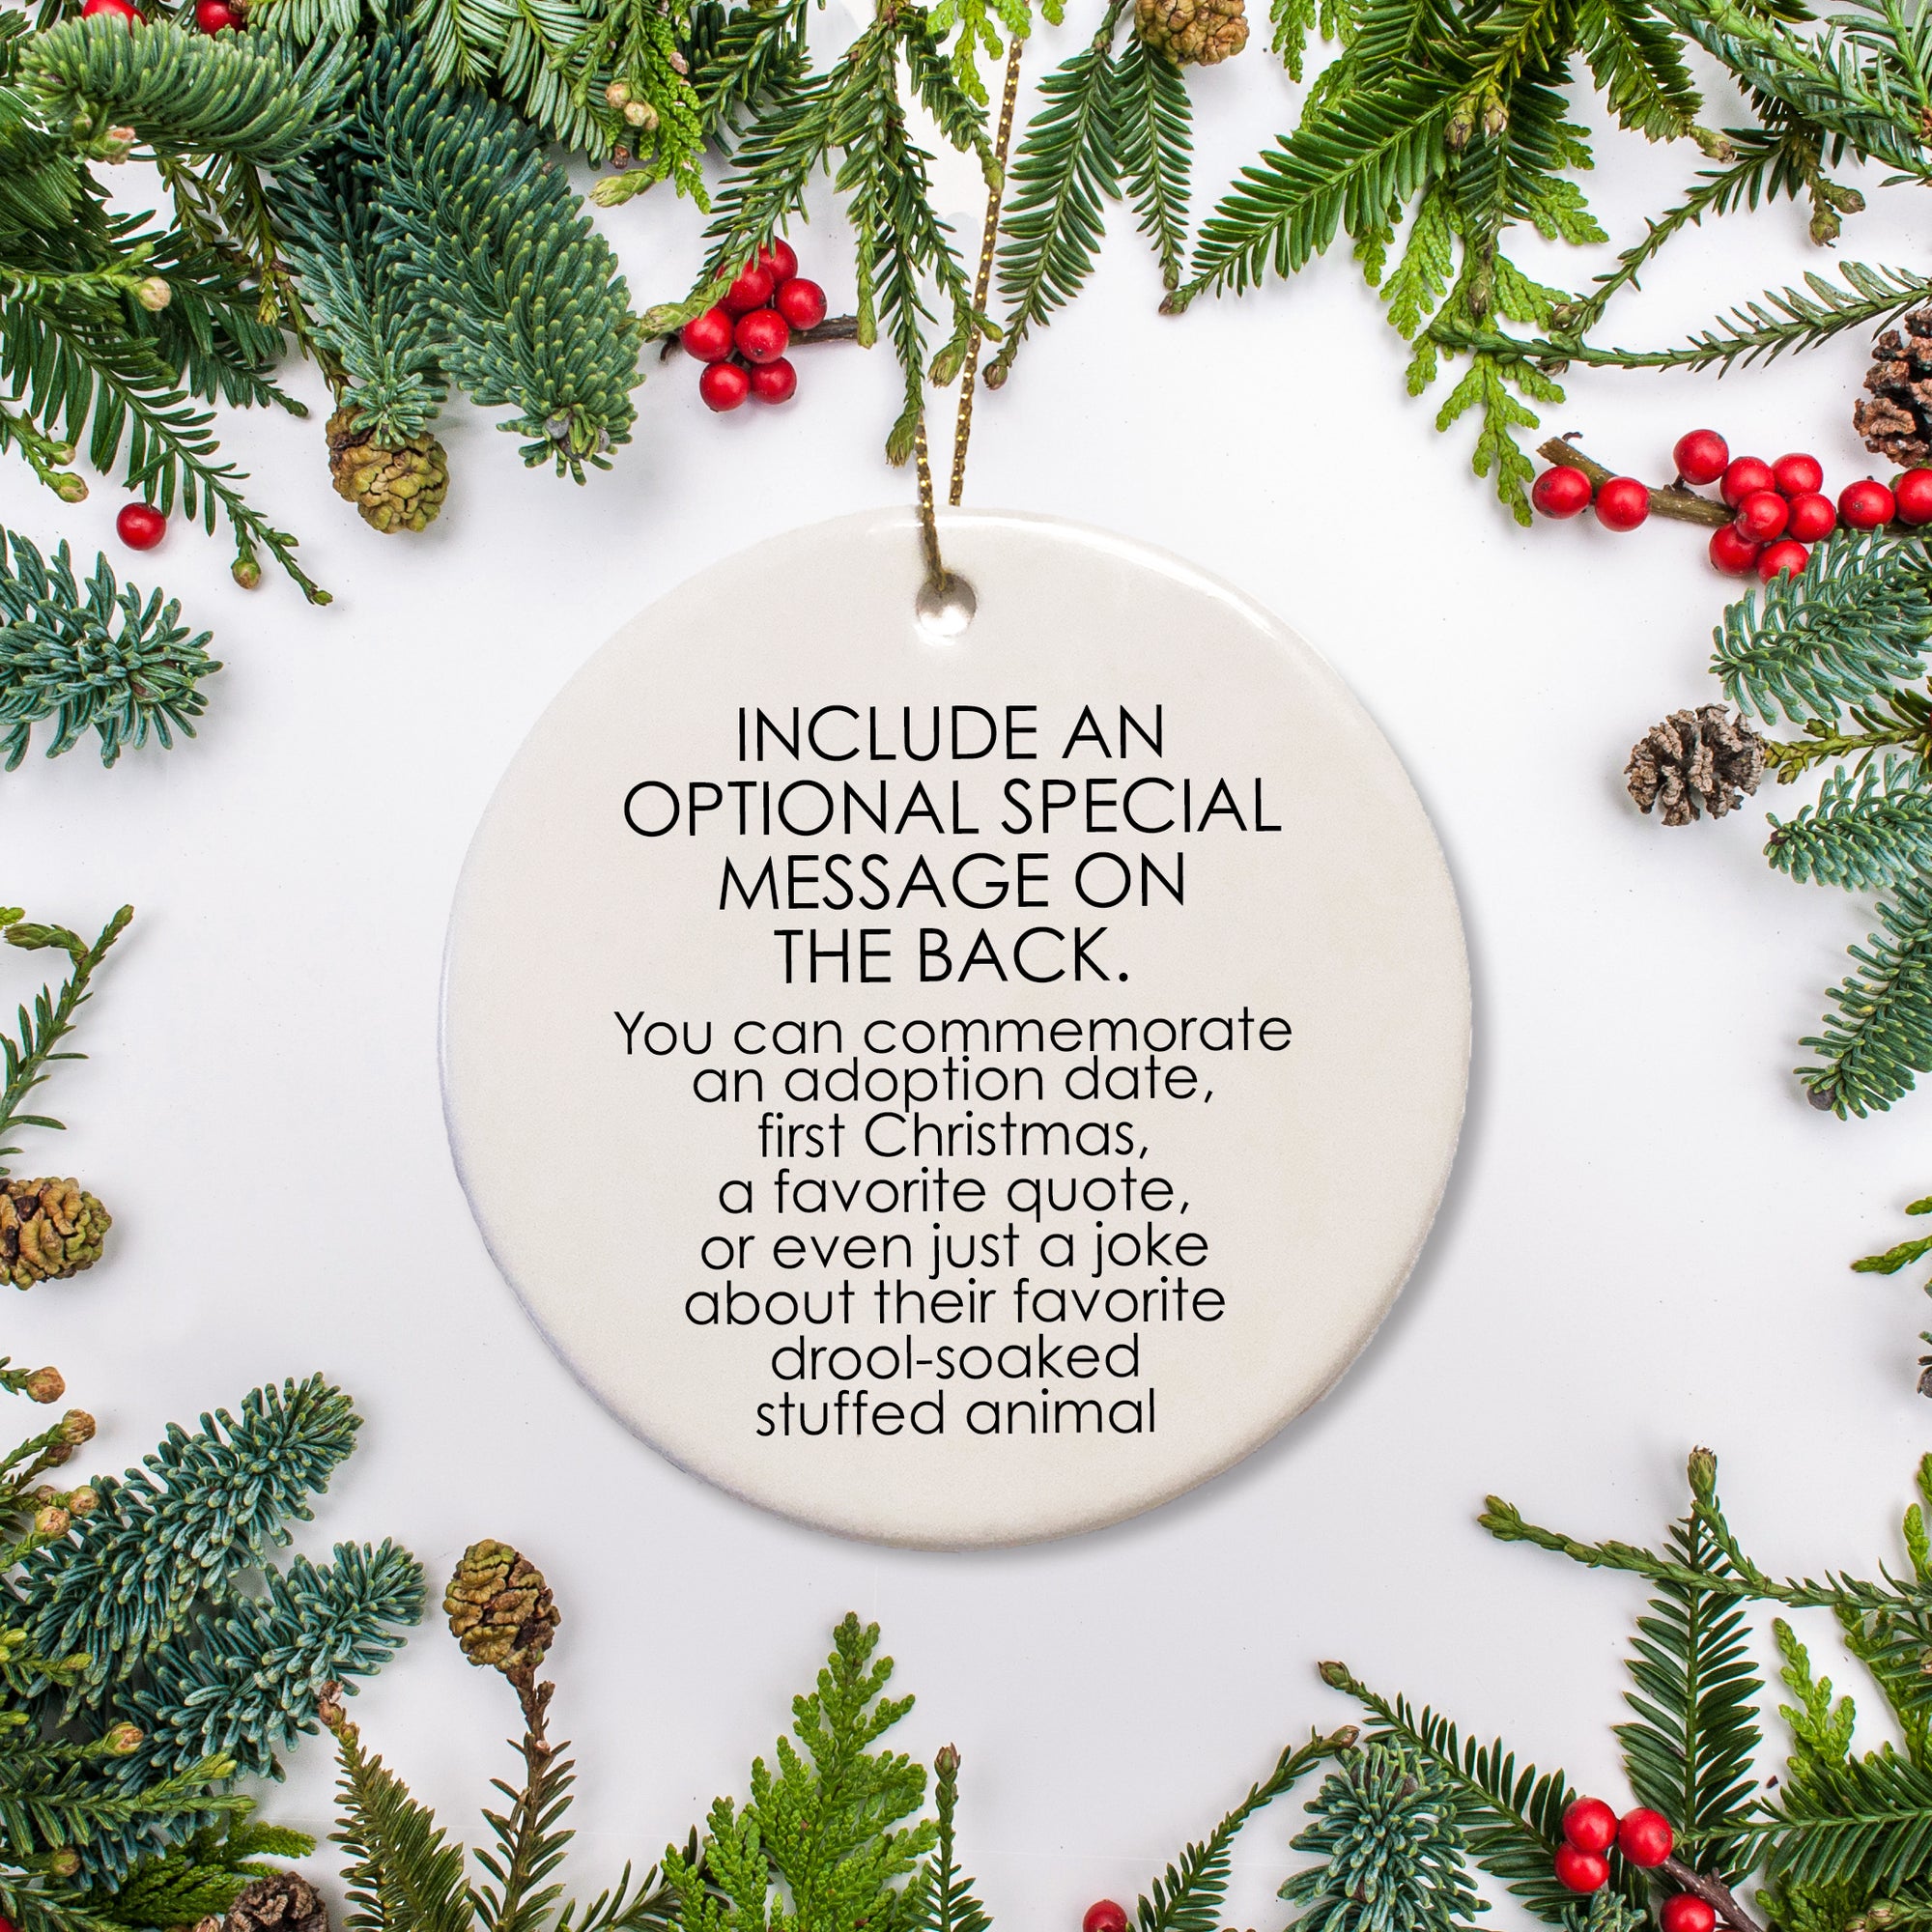 The back of the ornament provides the option to include a special message about the English Bulldog- a date, a funny story, a favorite quote, etc.